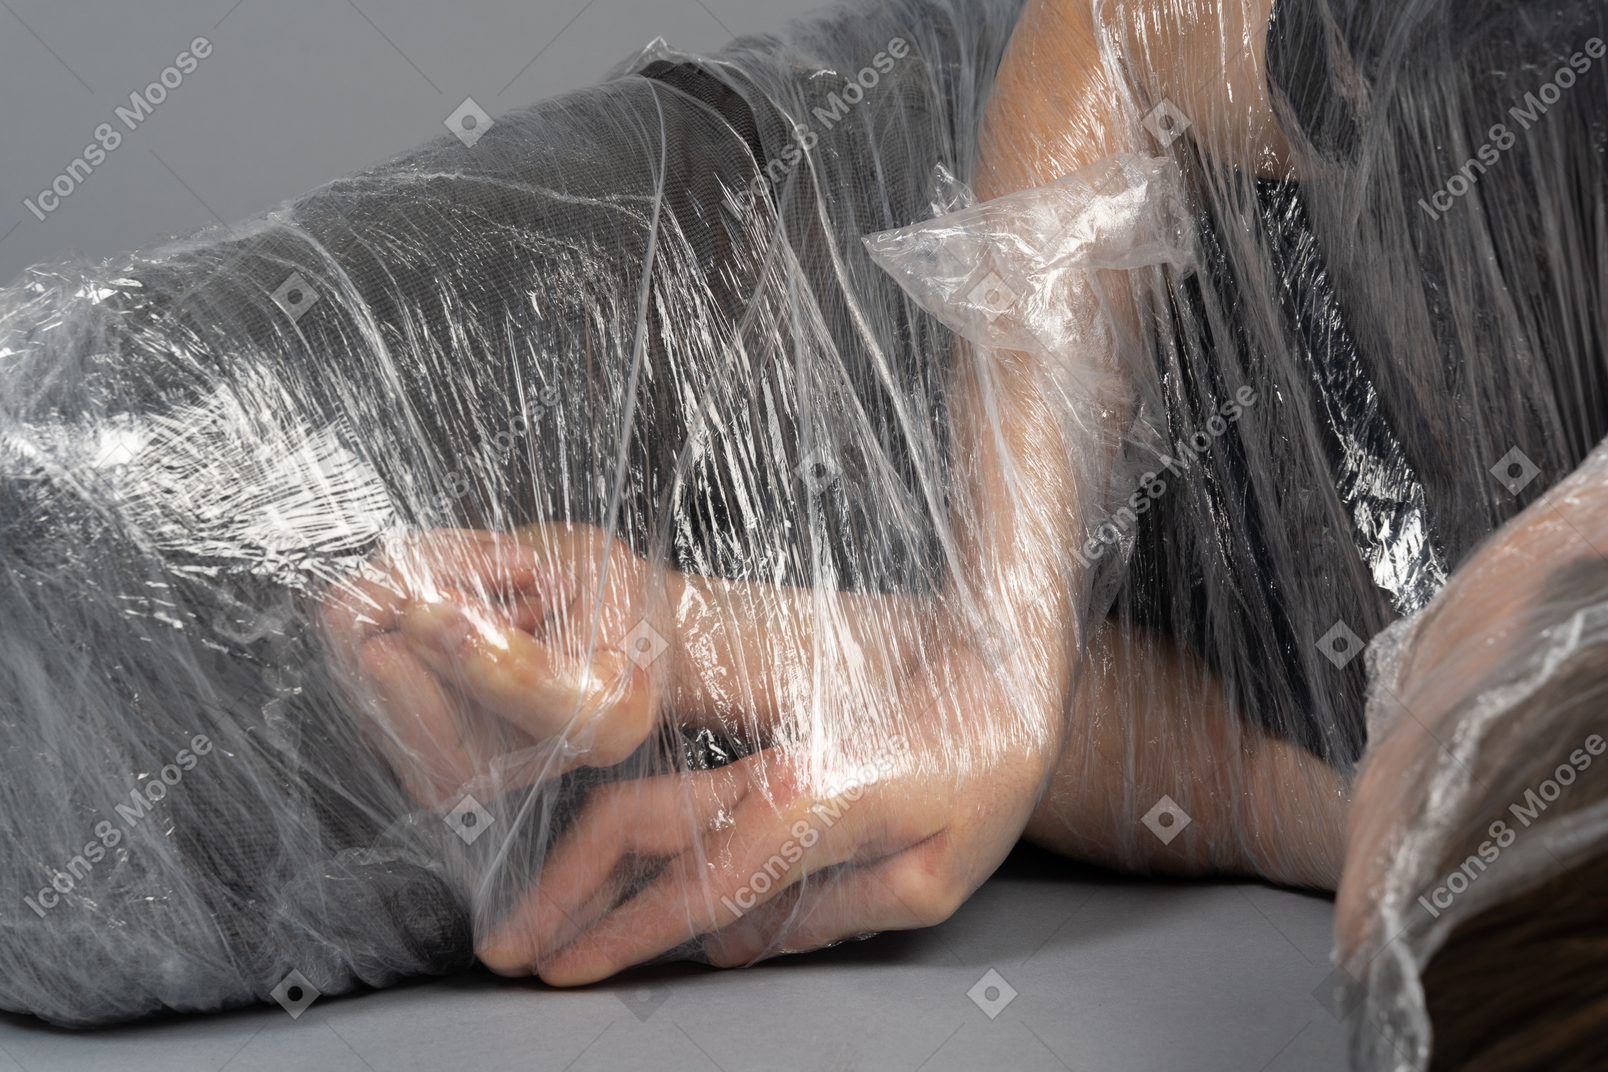 Hands of a young man wrapped in plastic